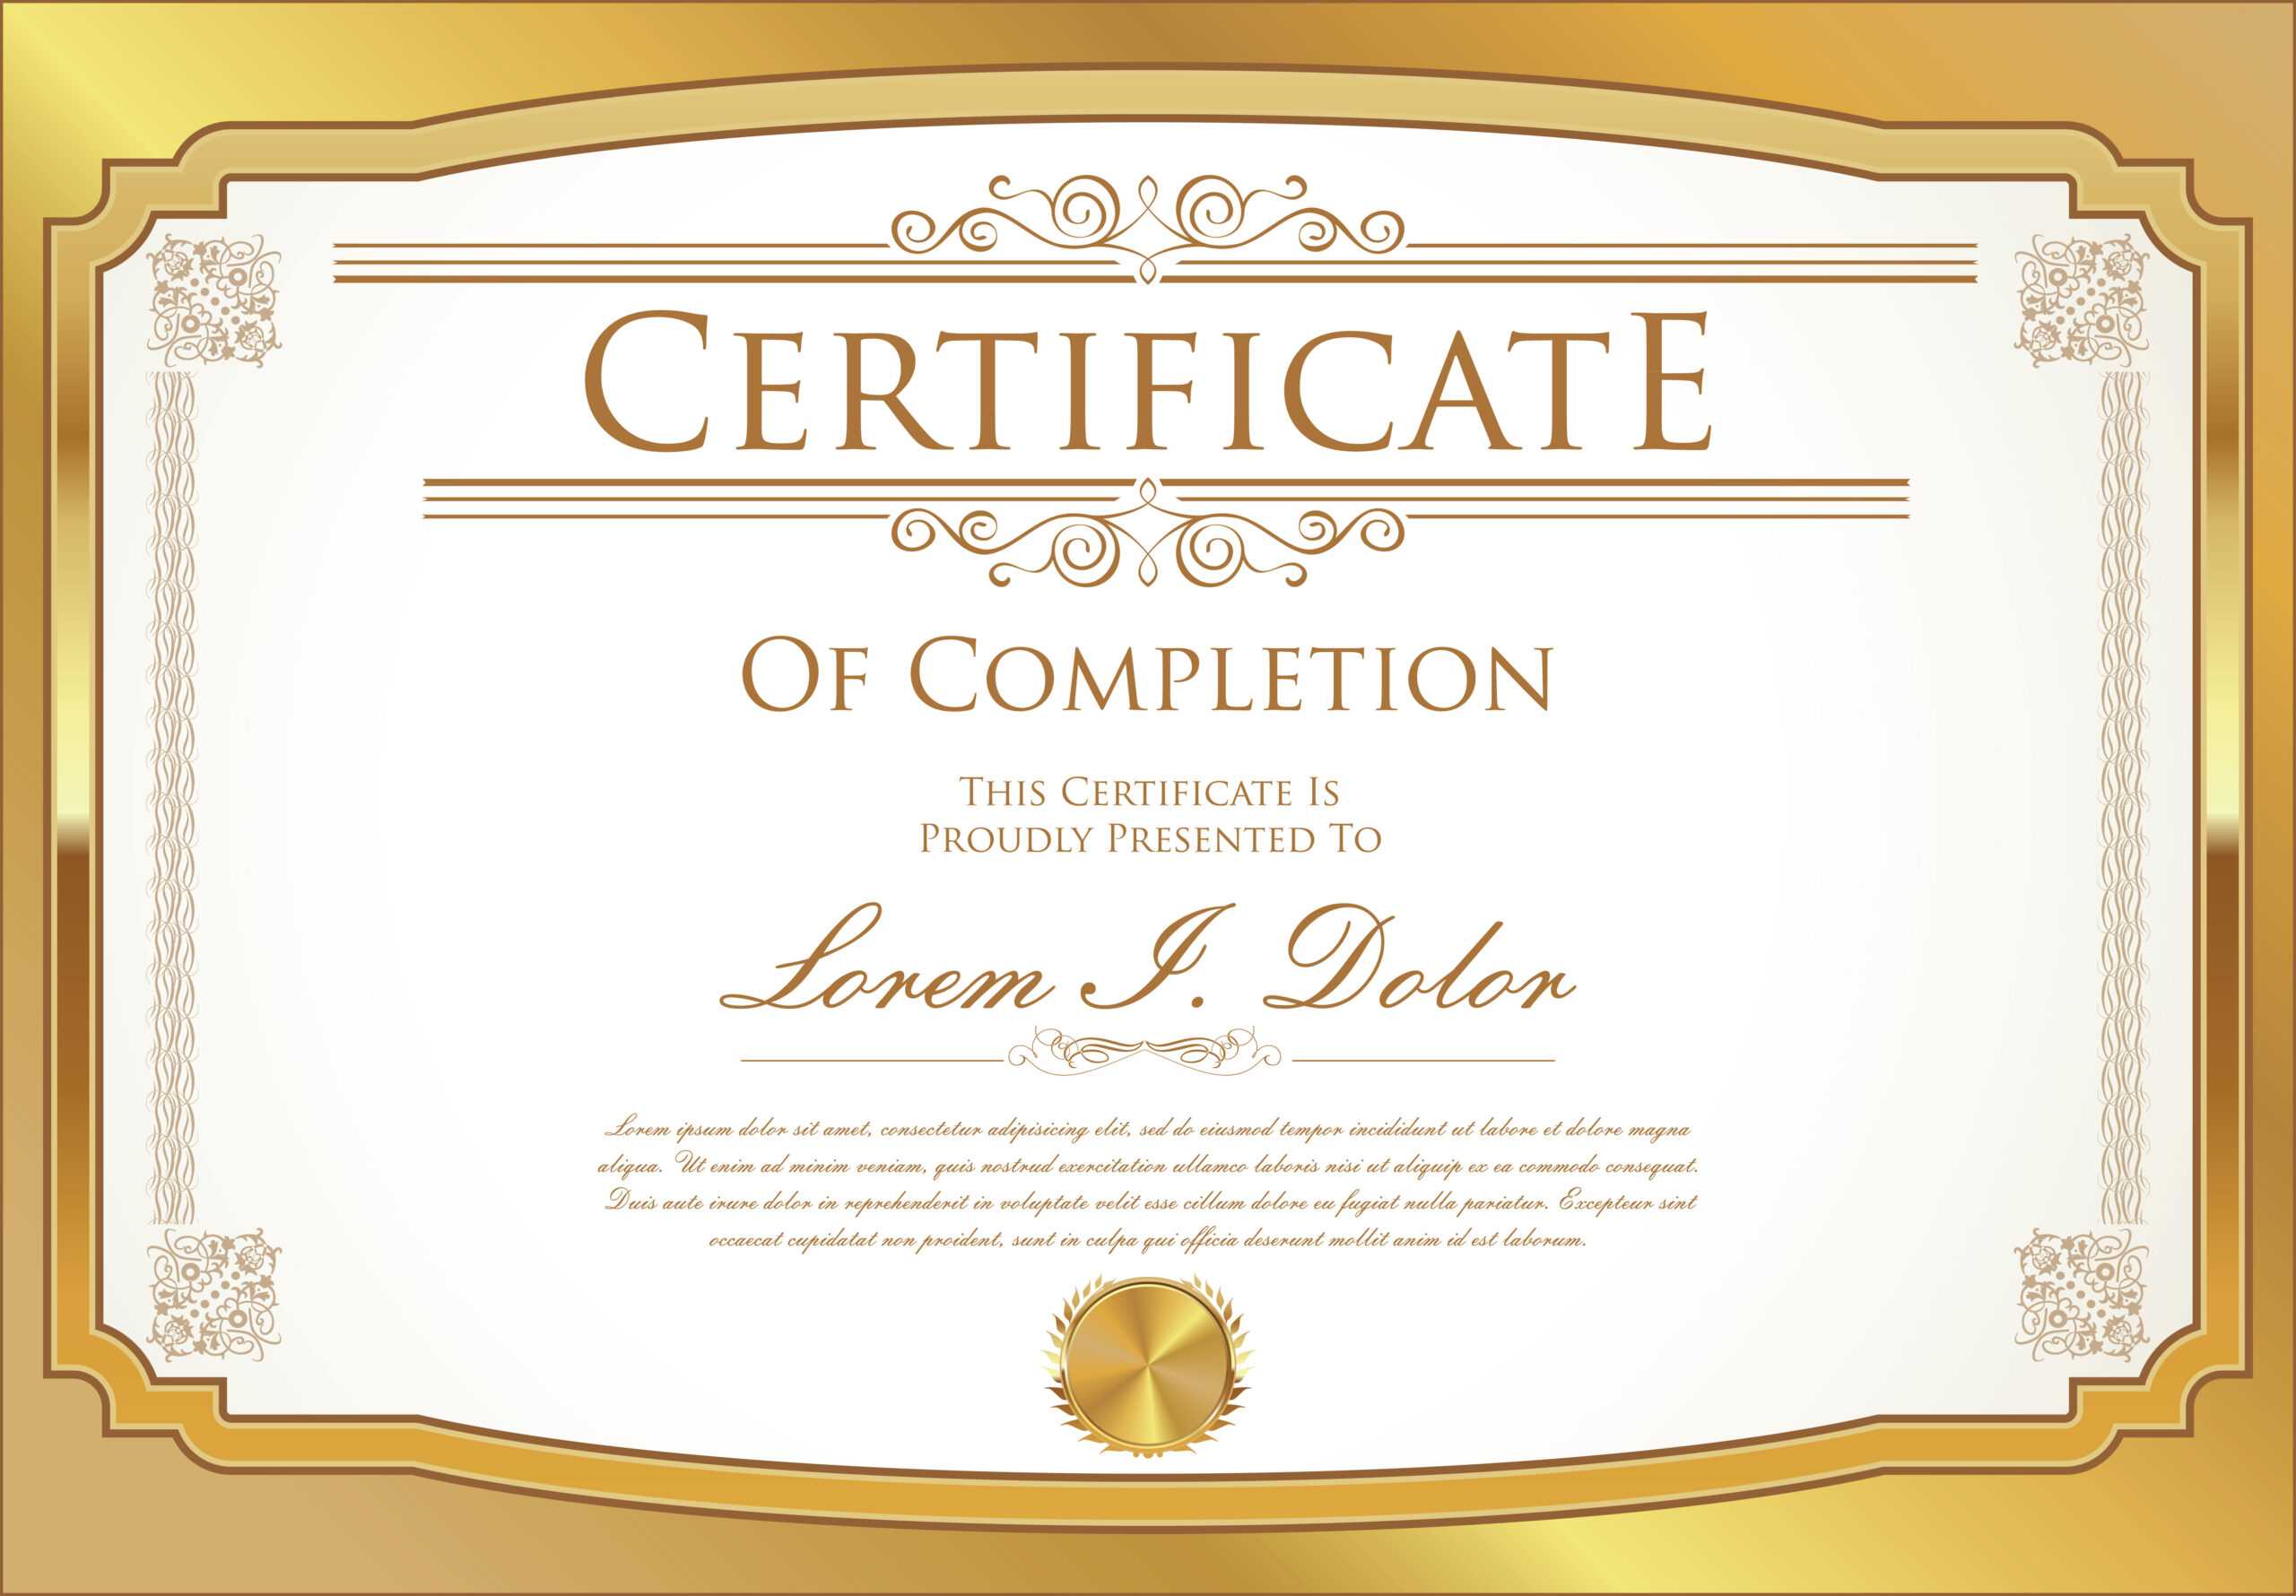 Certificate Template – Download Free Vectors, Clipart Intended For Commemorative Certificate Template